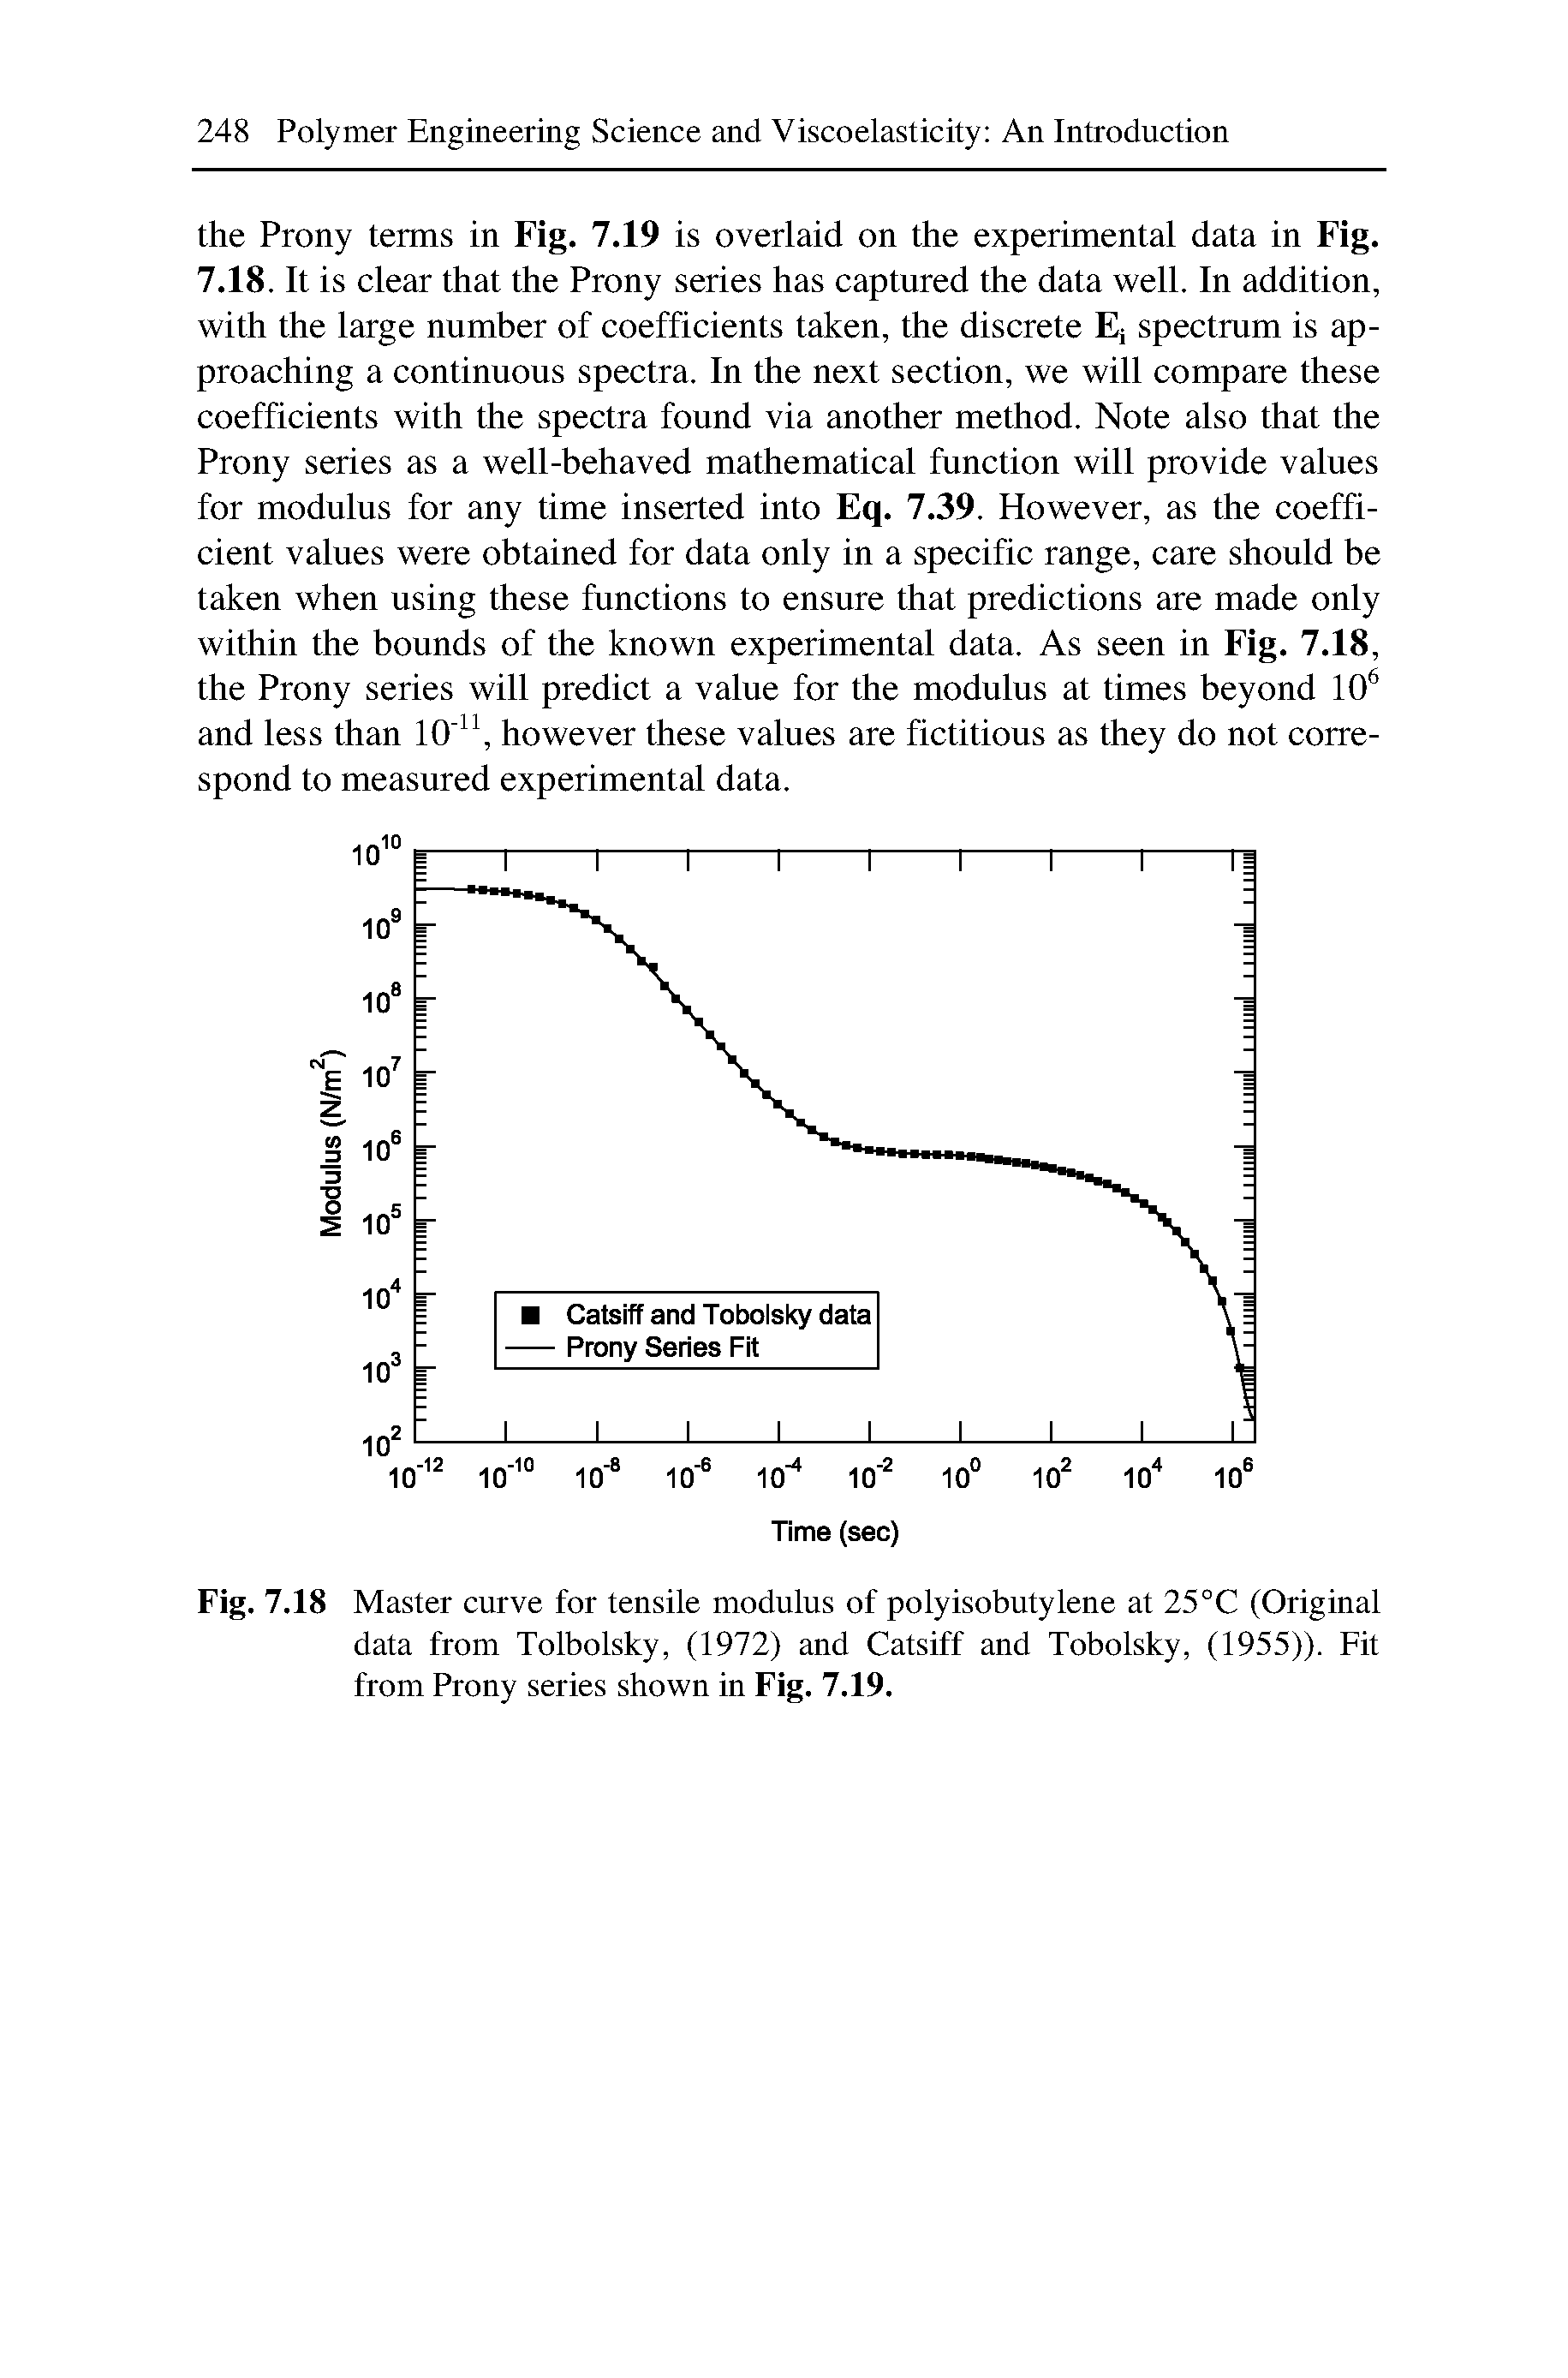 Fig. 7.18 Master curve for tensile modulus of polyisobutylene at 25°C (Original data from Tolbolsky, (1972) and Catsiff and Tobolsky, (1955)). Fit from Prony series shown in Fig. 7.19.